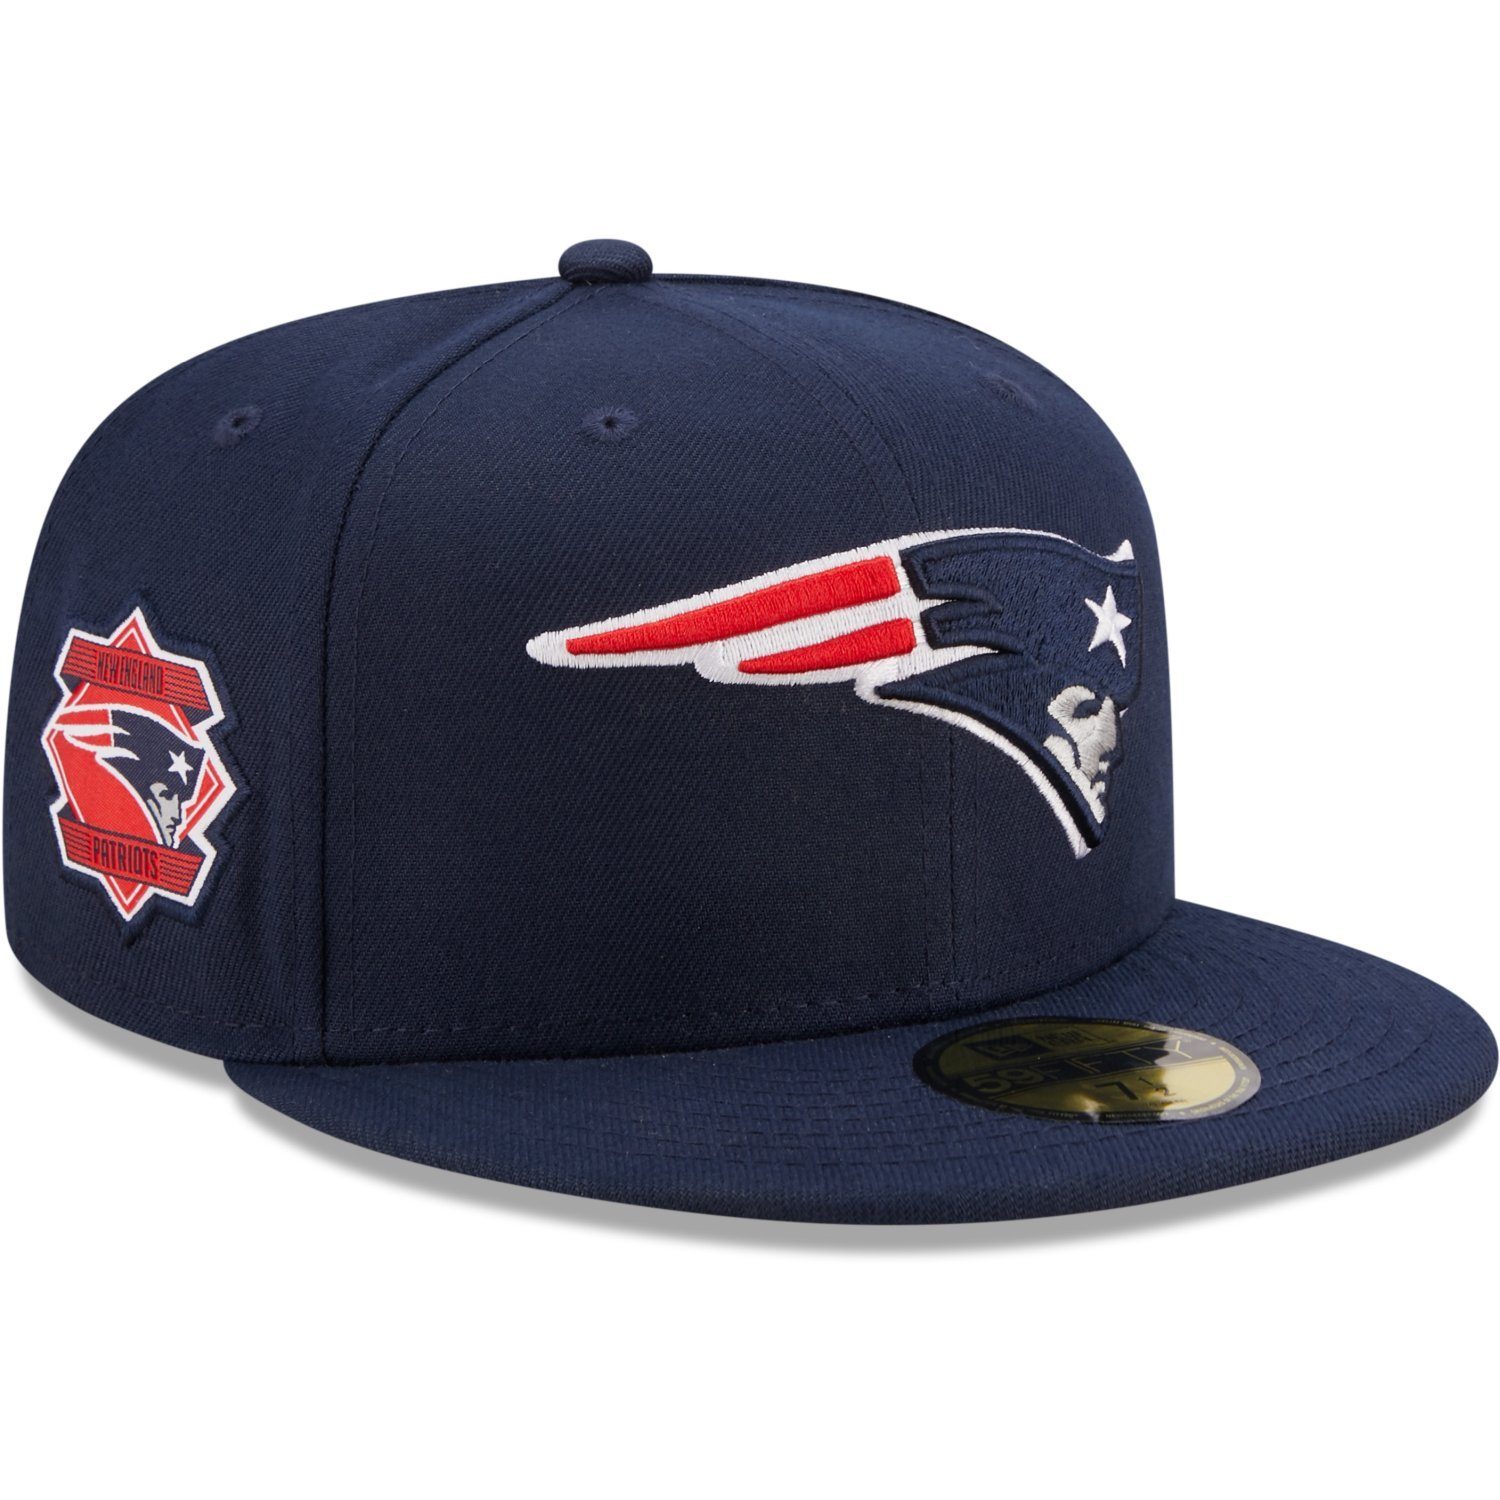 New SIDE Era Cap PATCH Fitted 59Fifty New England Patriots